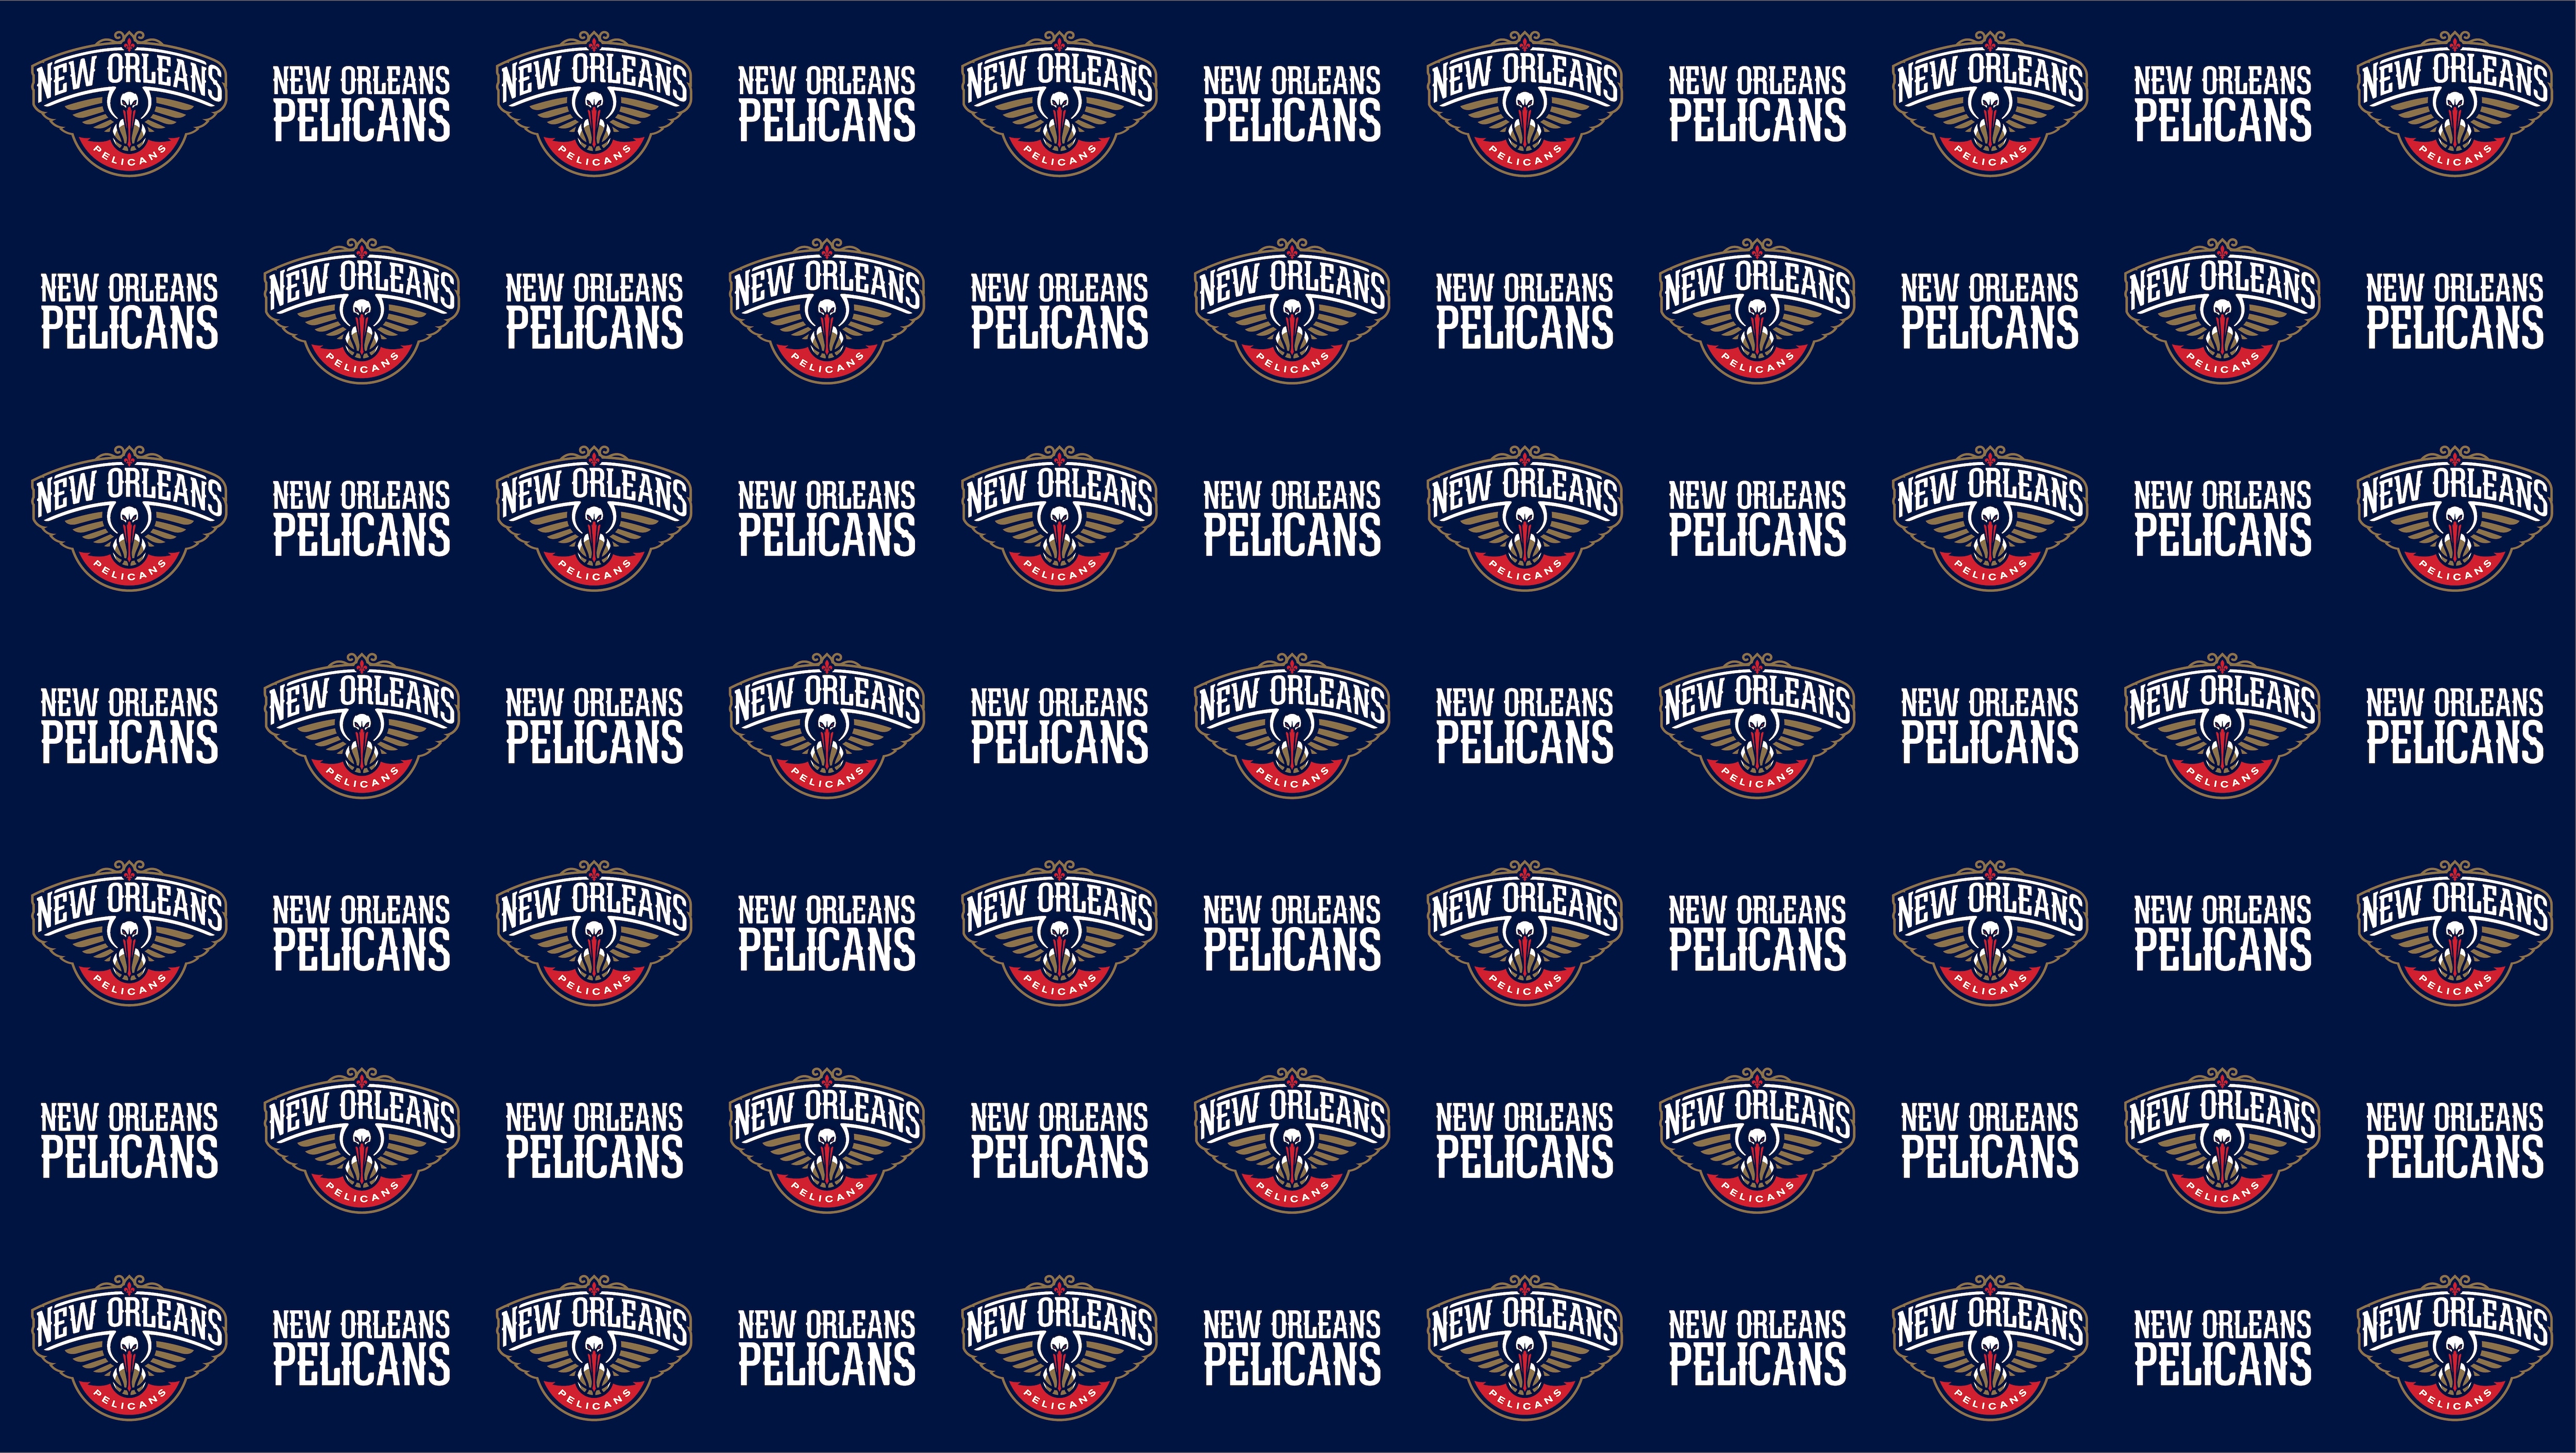 Video Conference Background For Pelicans Fans Working Remotely